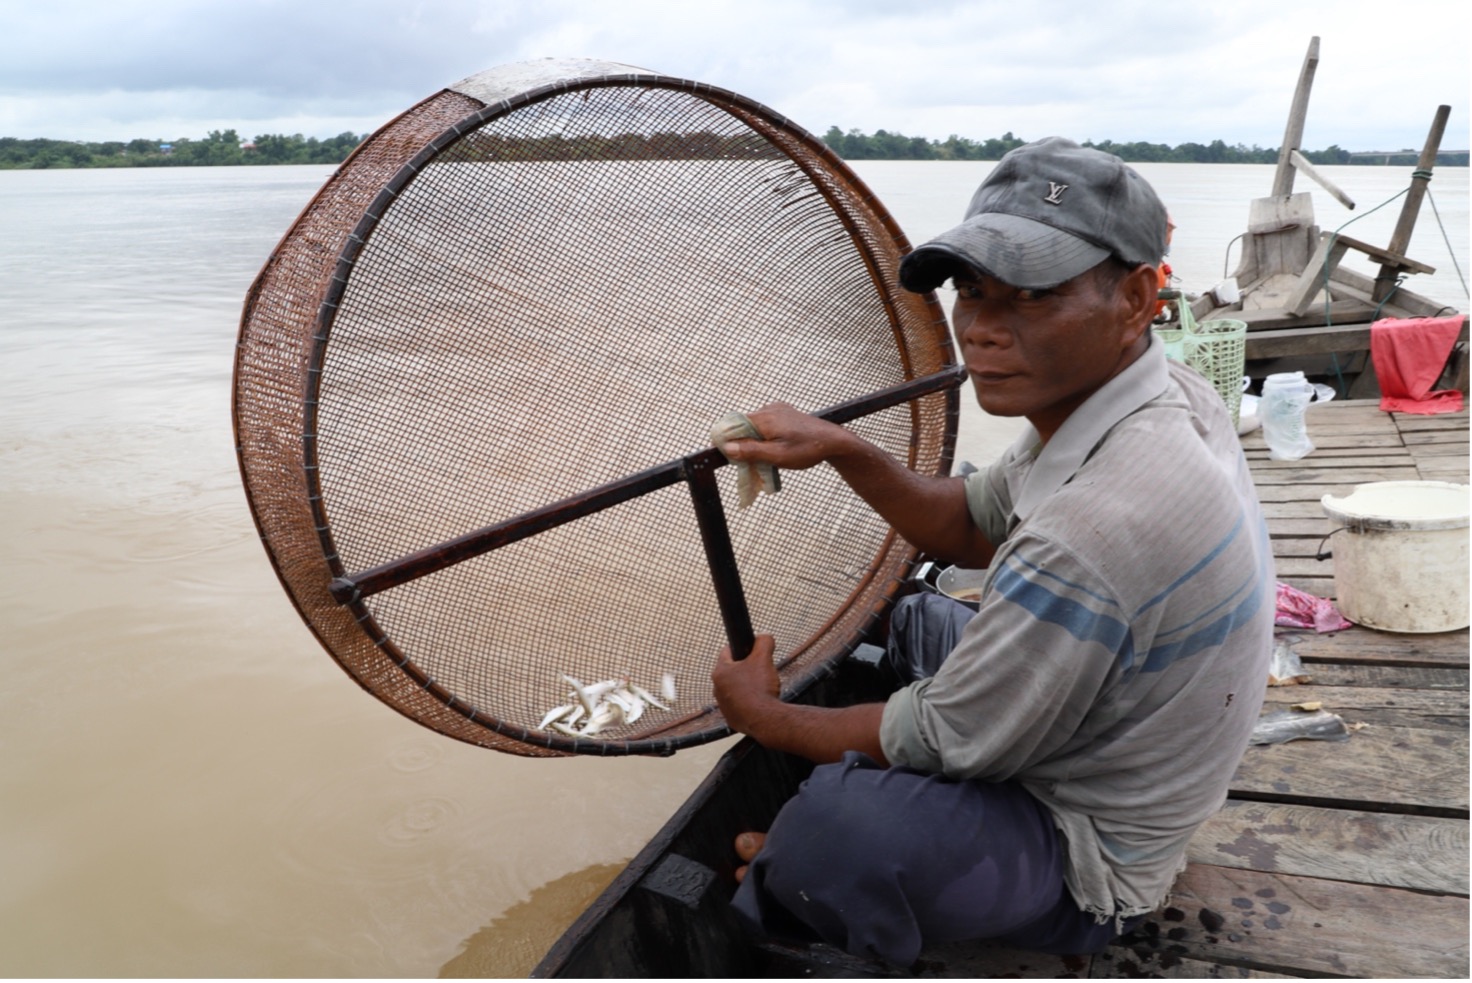 A Small-scale Fishing Gear: The Big Round Scoop Basket - Mekong